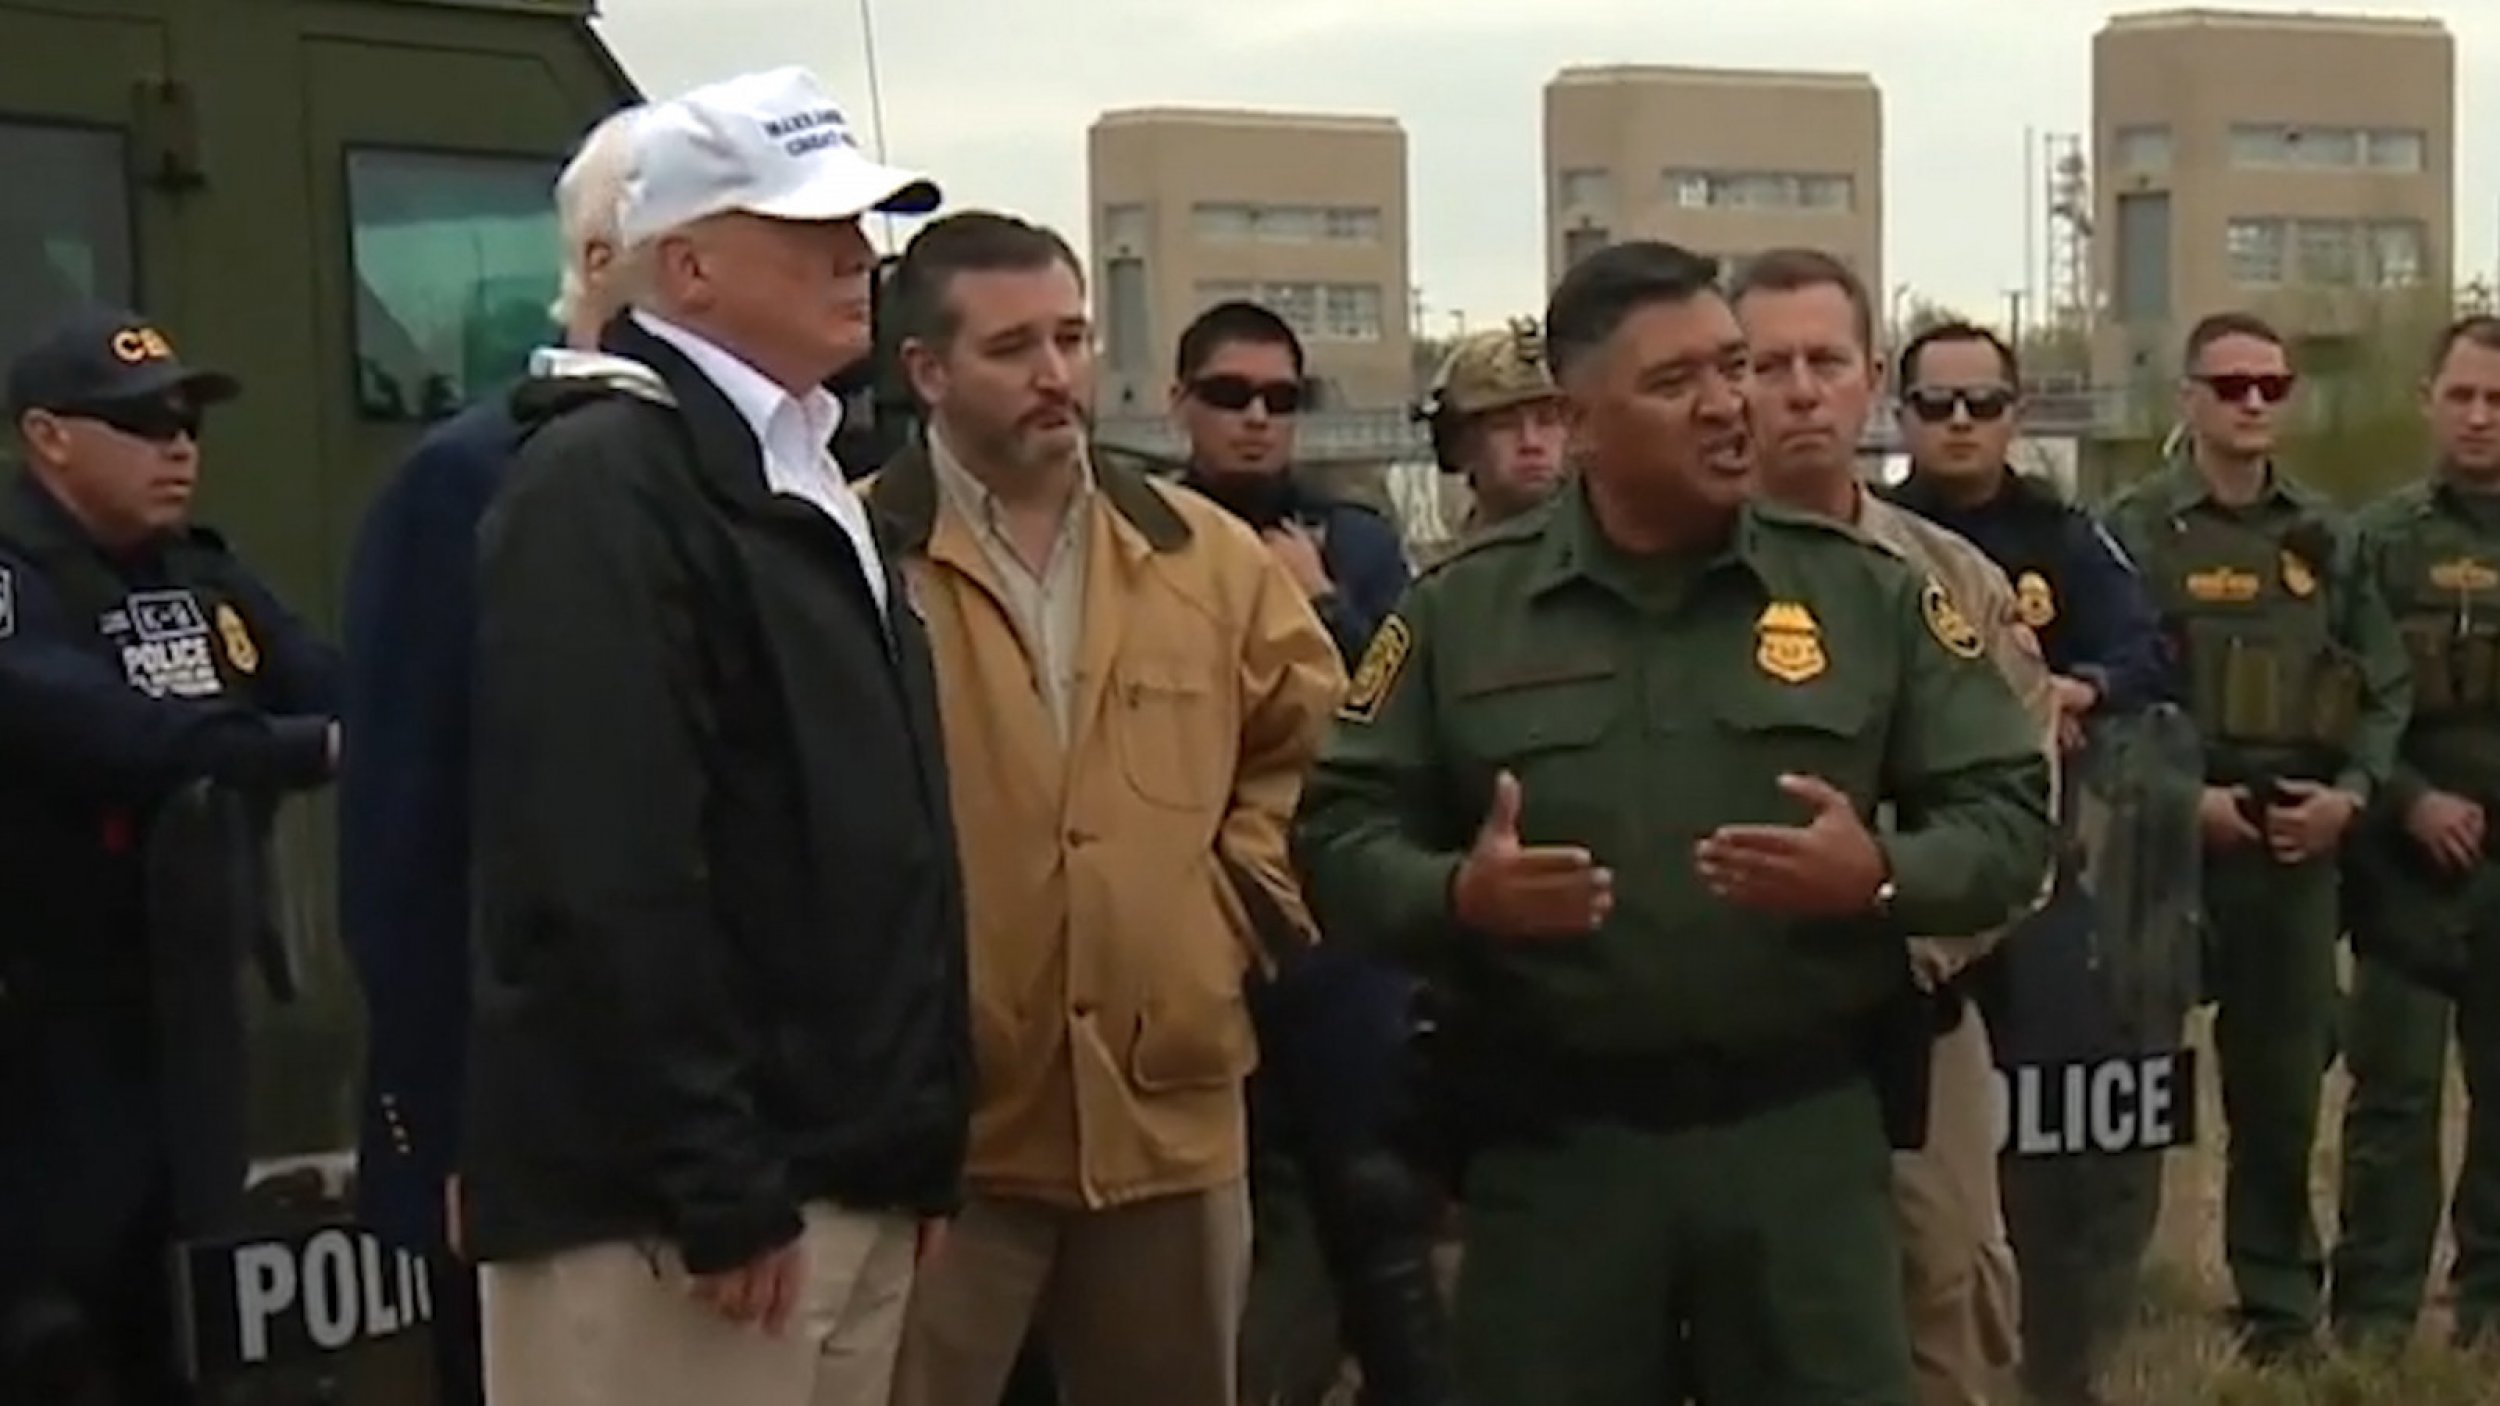 President Trump Briefed On Border Security In McAllen, Texas